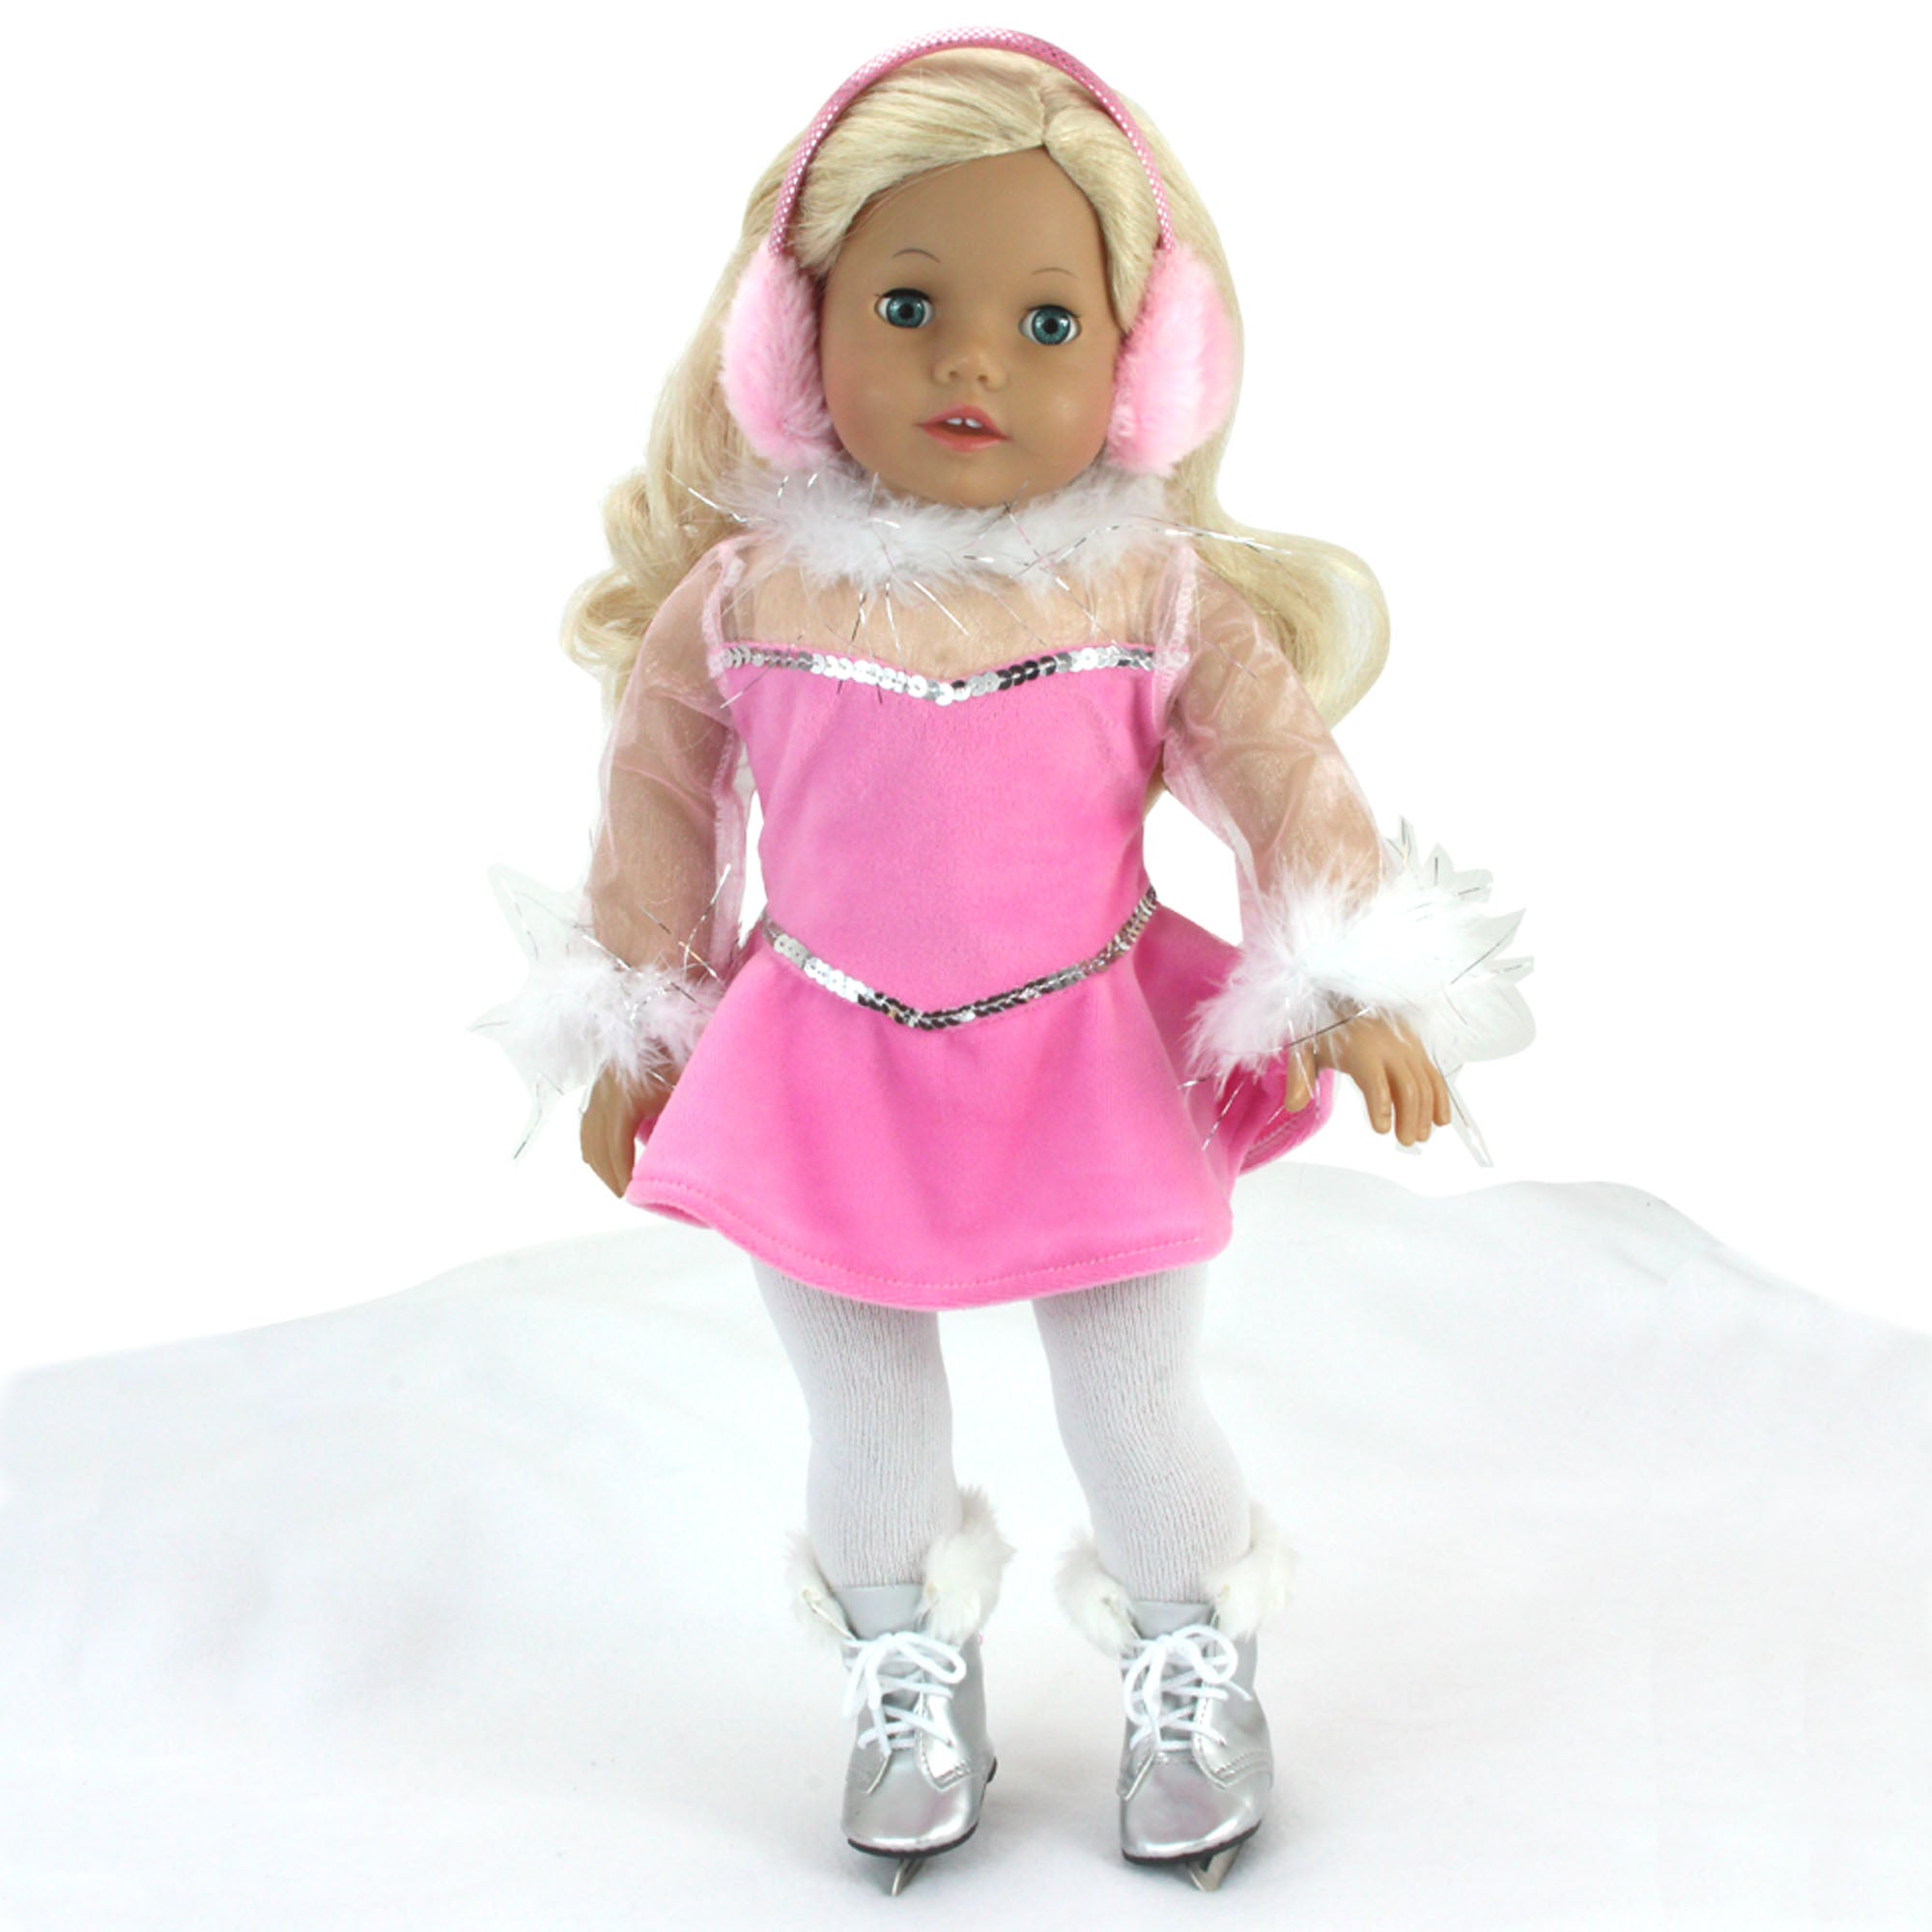 Sophia's Complete Figure Skating Outfit with Dress, Ice Skates and Accessories for 18" Dolls, Pink/Silver